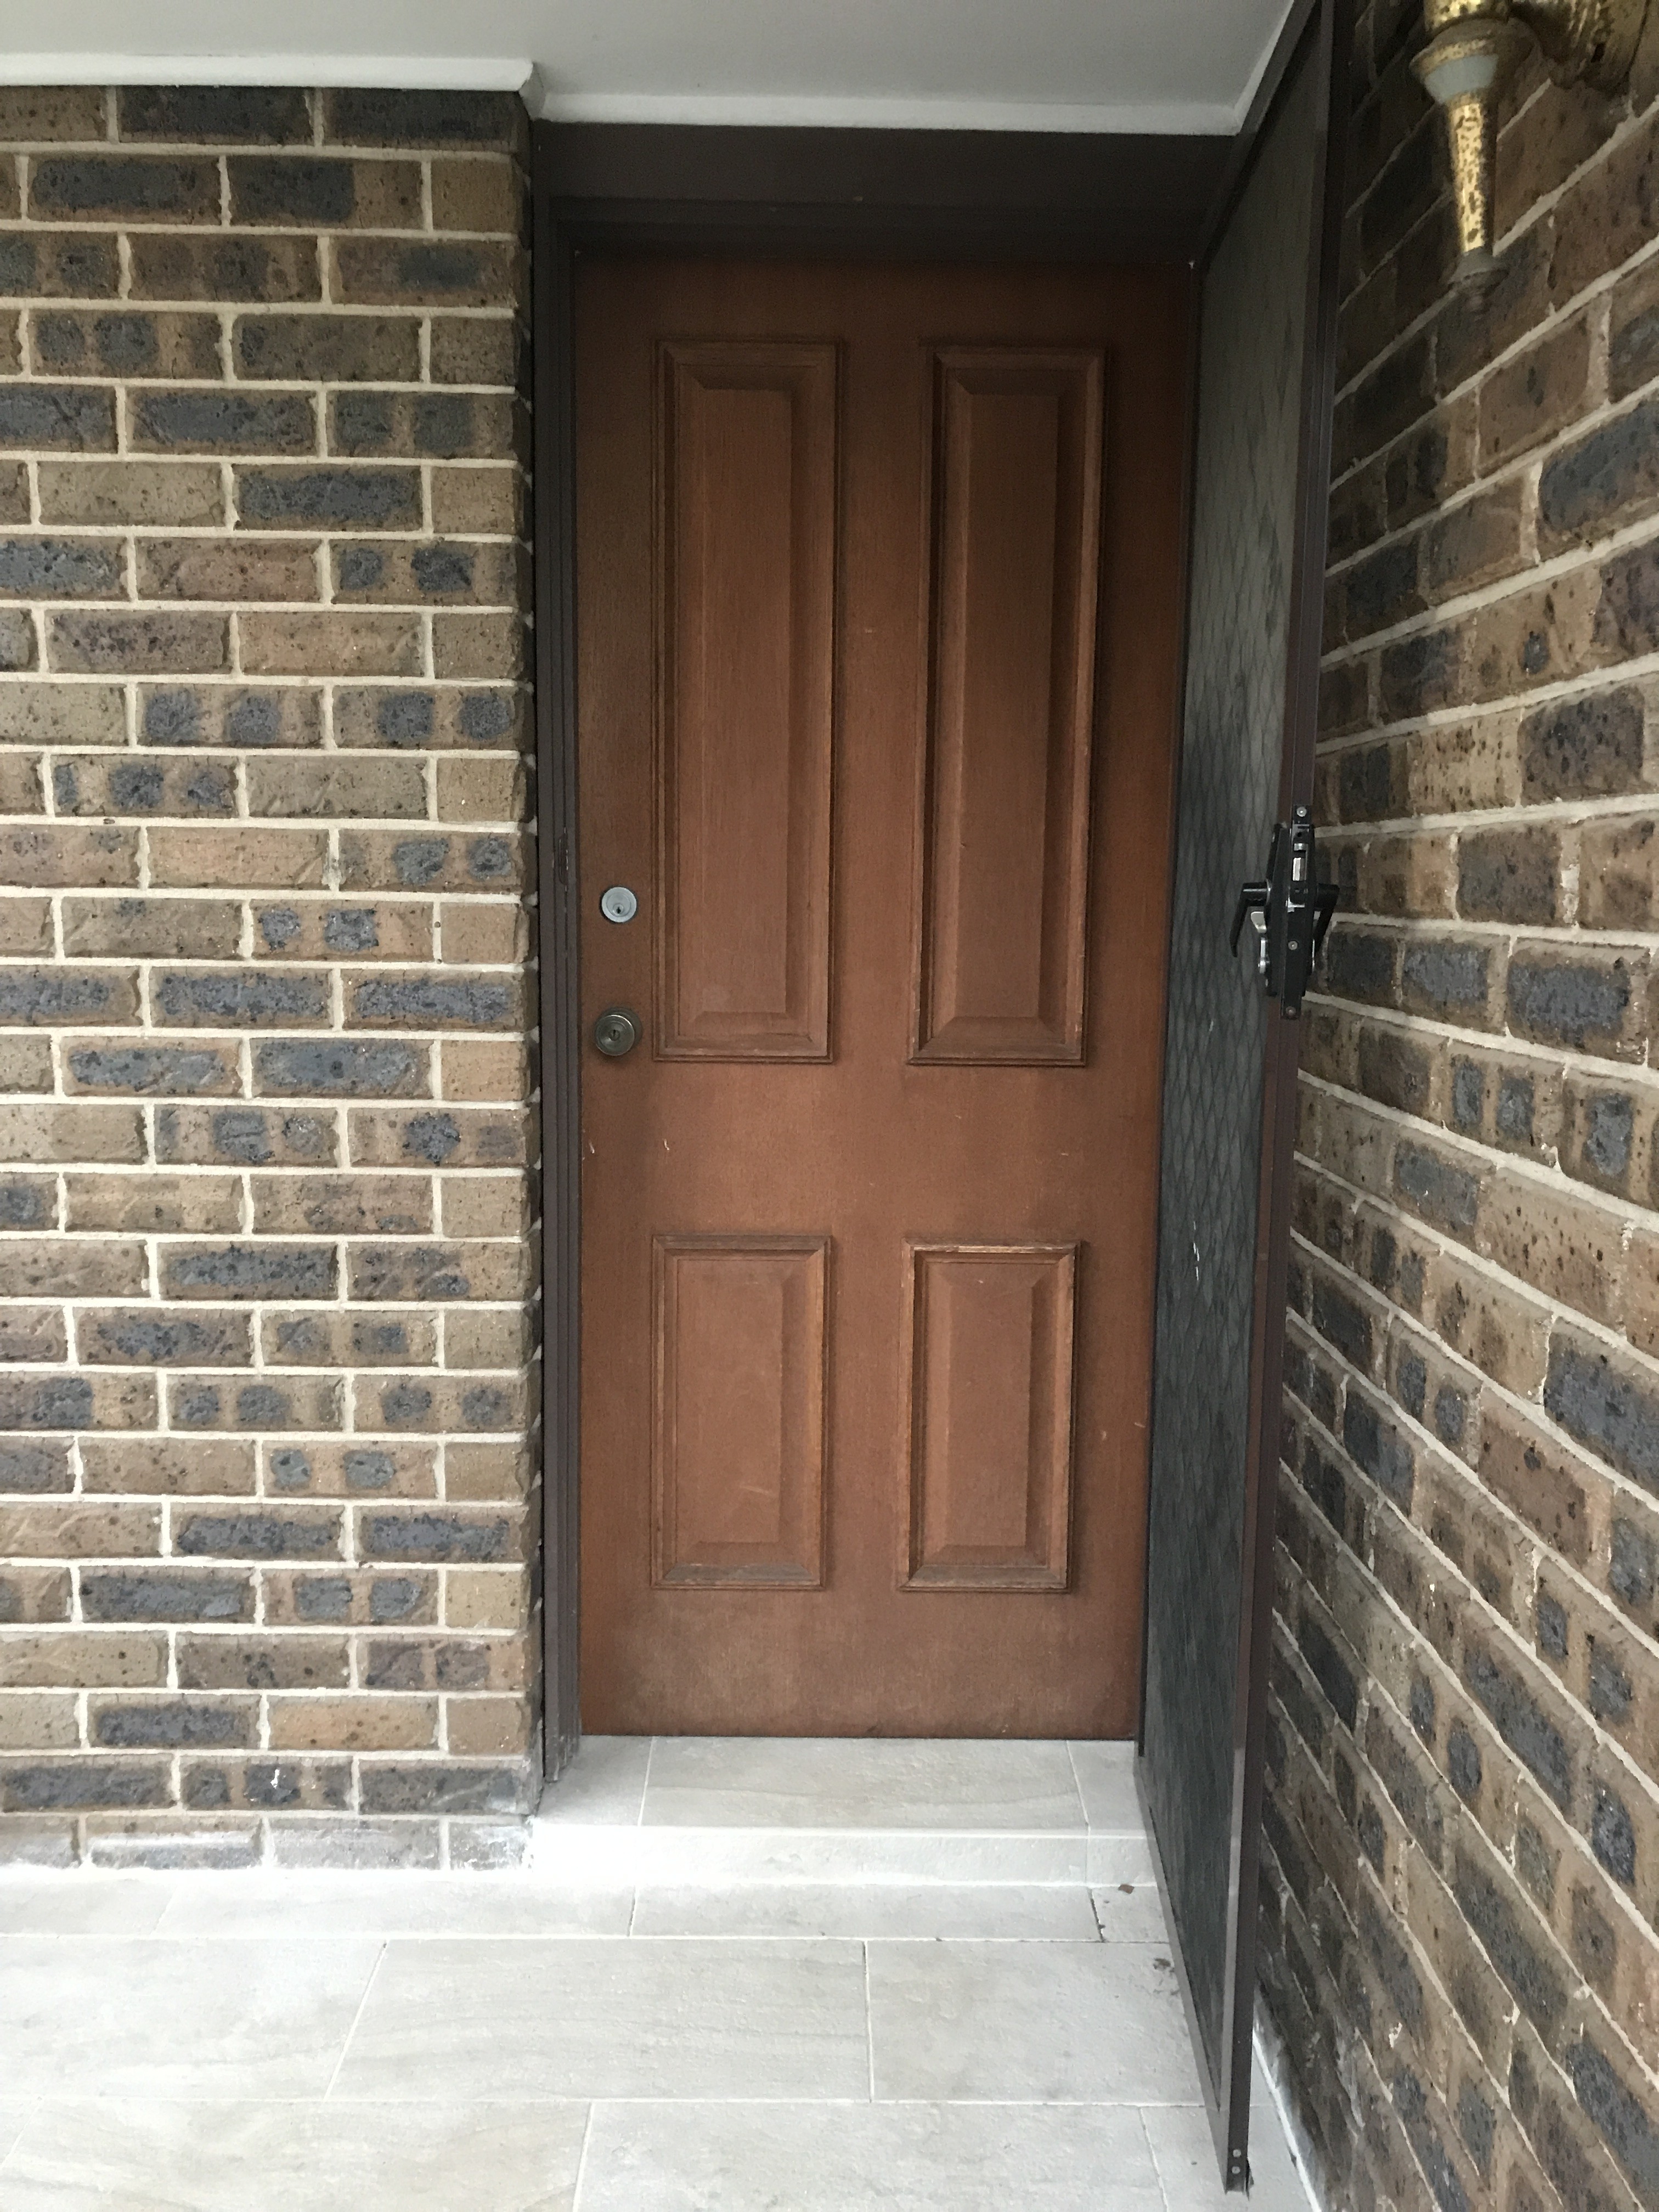 7a Install New Door, Jamb, Locks and Hinges